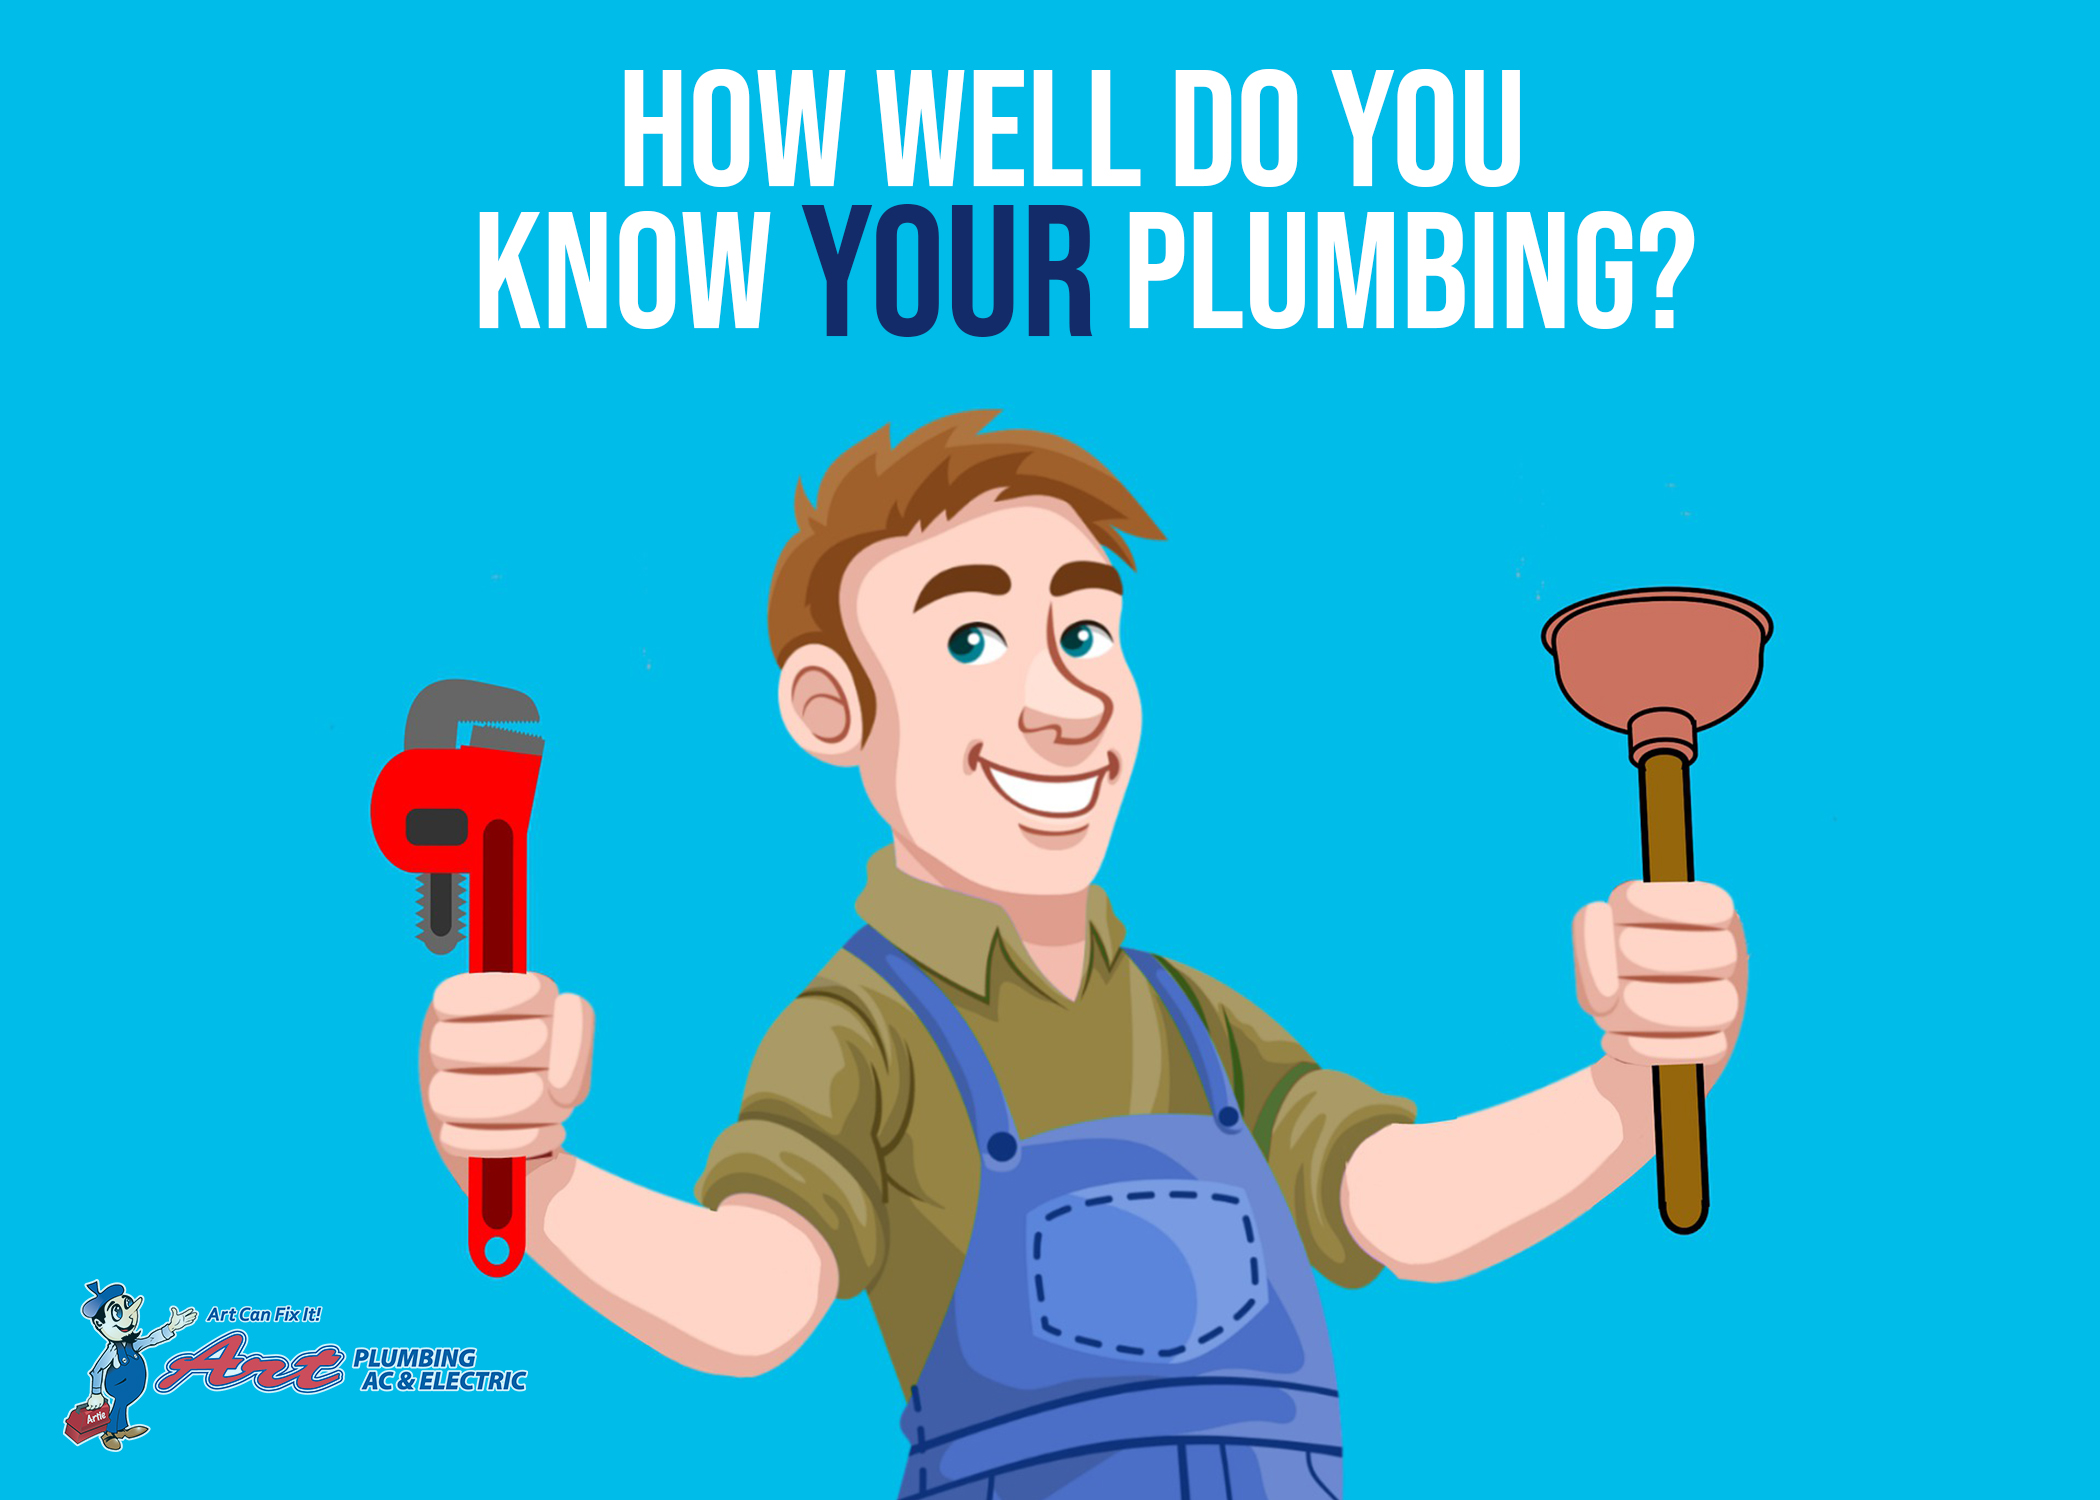 How Well Do You Know Your Plumbing? Take The Quiz